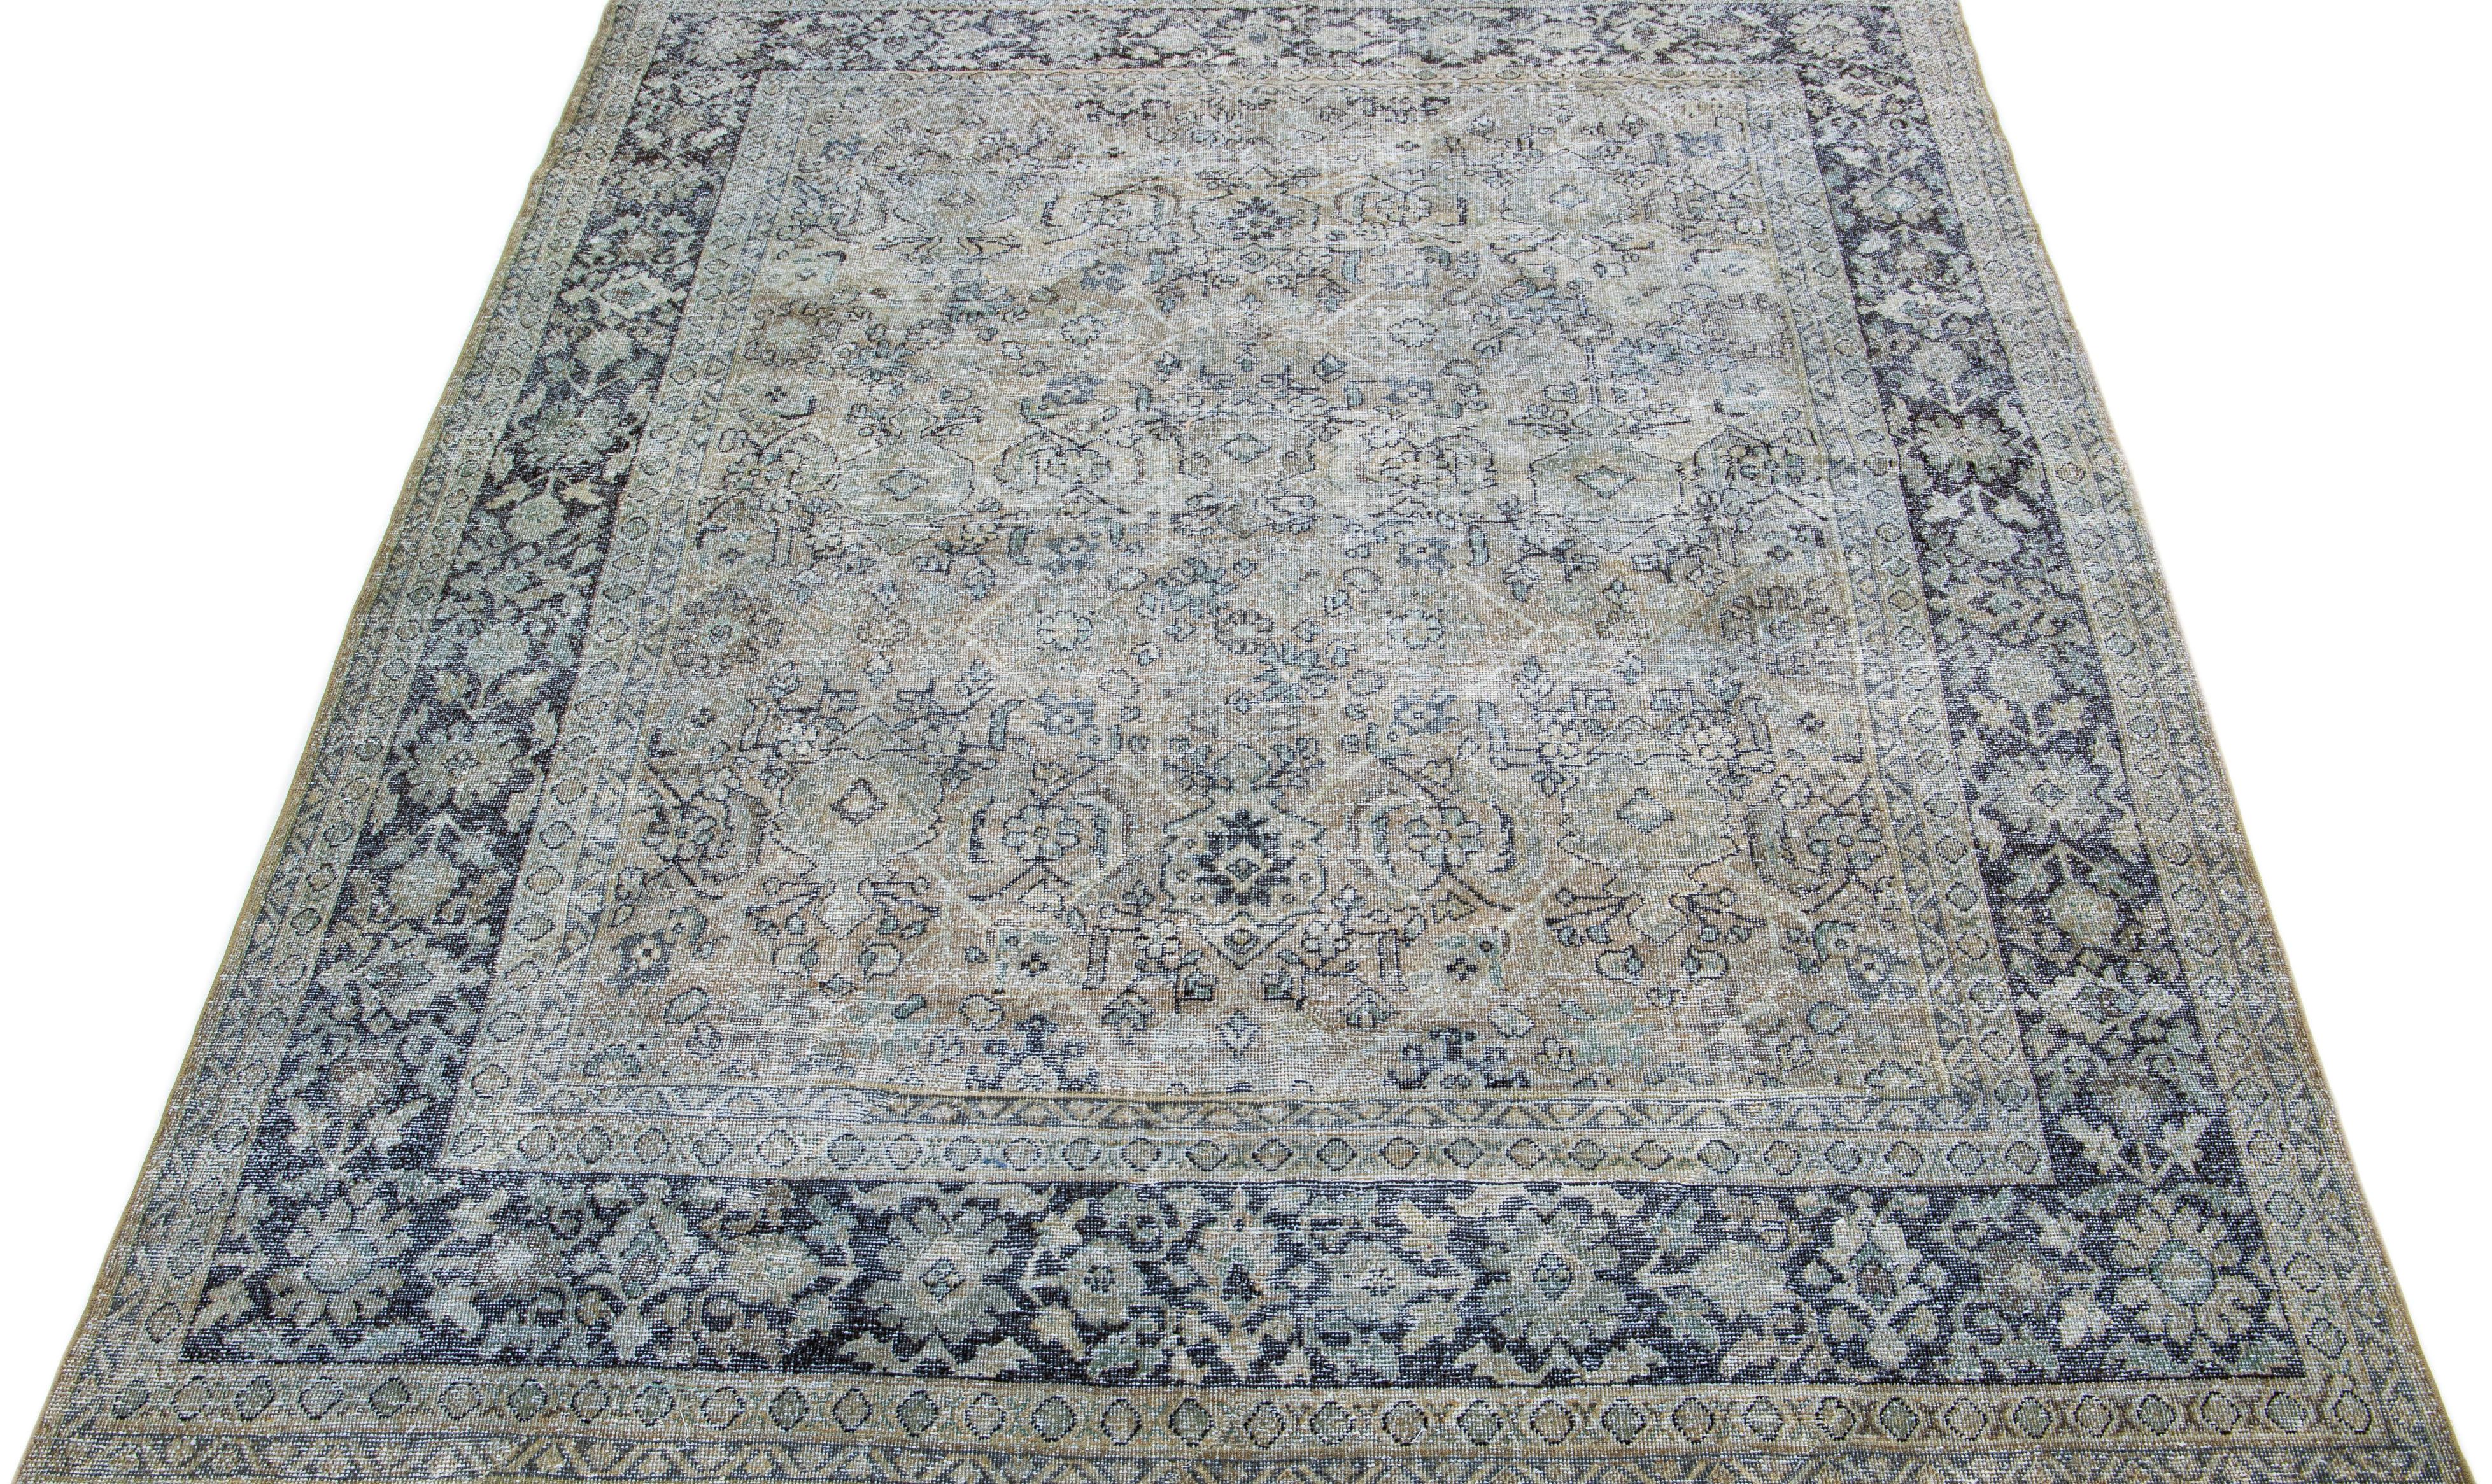 Beautiful antique Tabriz hand-knotted wool rug with a grey color field. This Persian rug has a blue frame and accents in a gorgeous all-over floral design.

This rug measures: 7'10